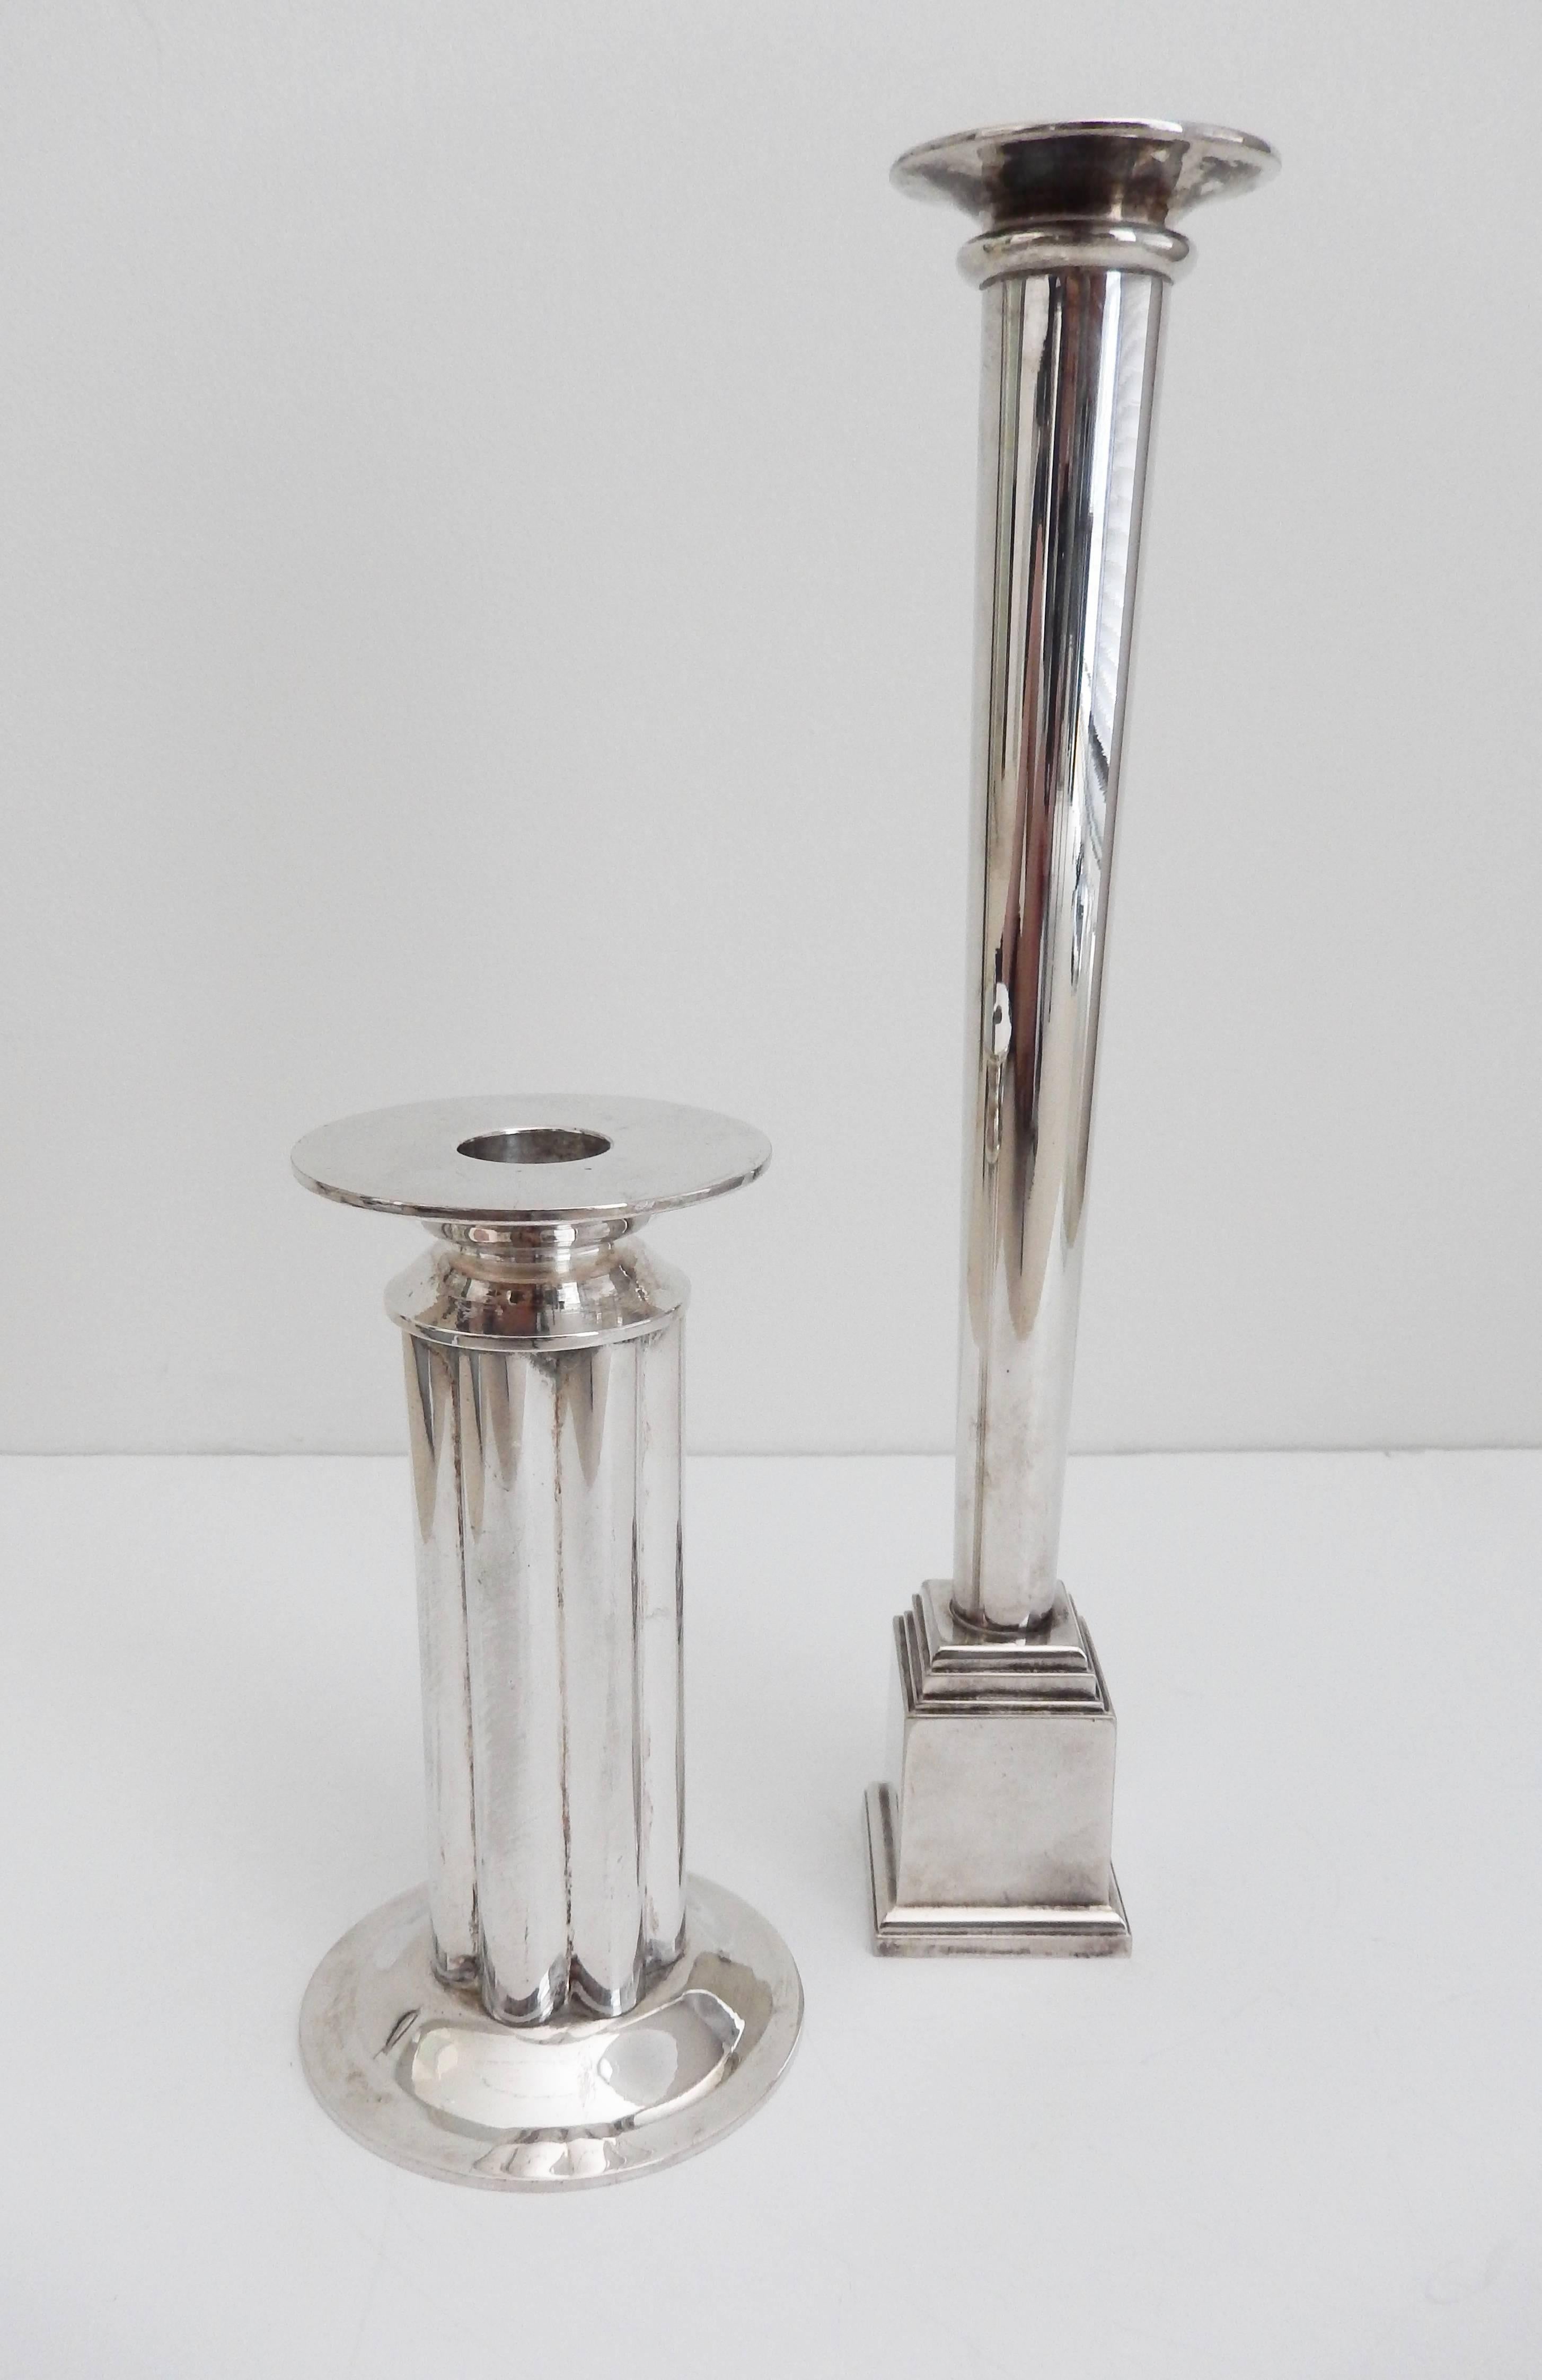 Two impressive silver plated candlesticks designed by the postmodernist architect Robert A. M. Stern (b. 1939) for Swid Powell. The columnar designs reflect Stern's interest in classical modernism. Both signed with impressed signature and marked